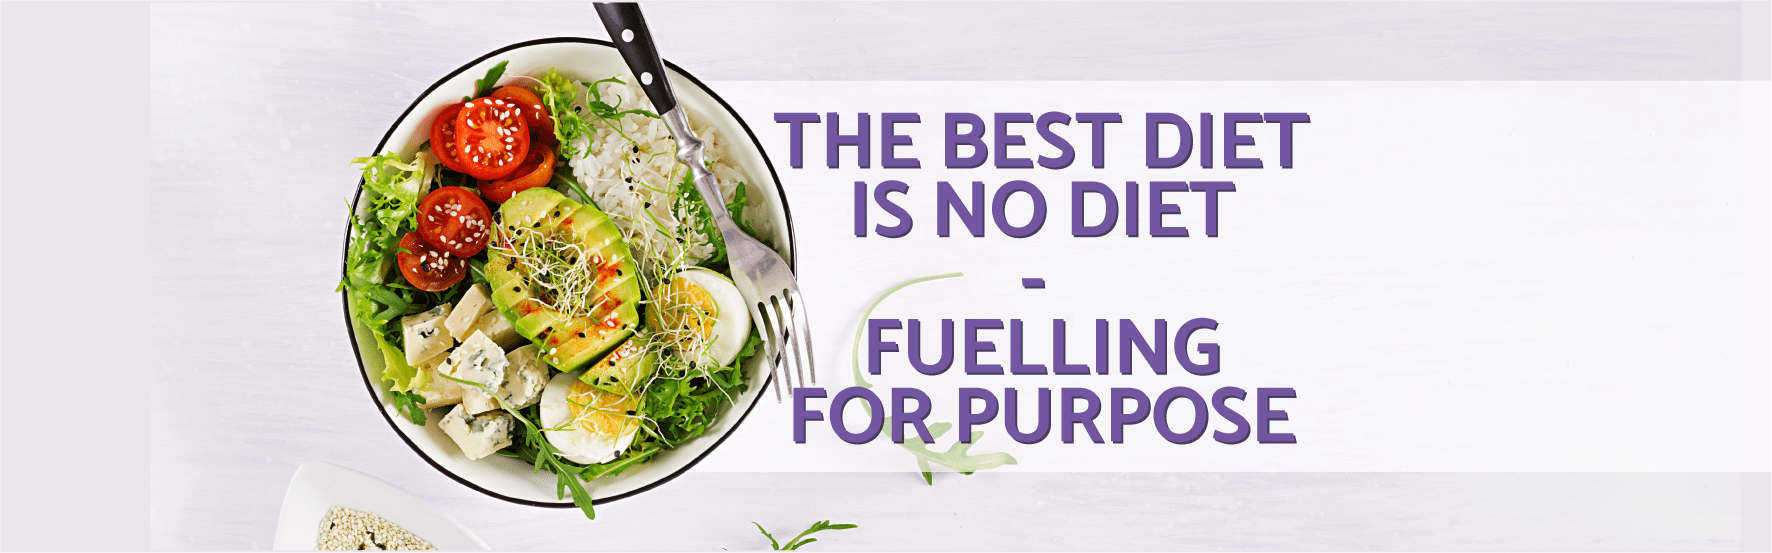 The Best Diet is No Diet - Fuelling for Purpose